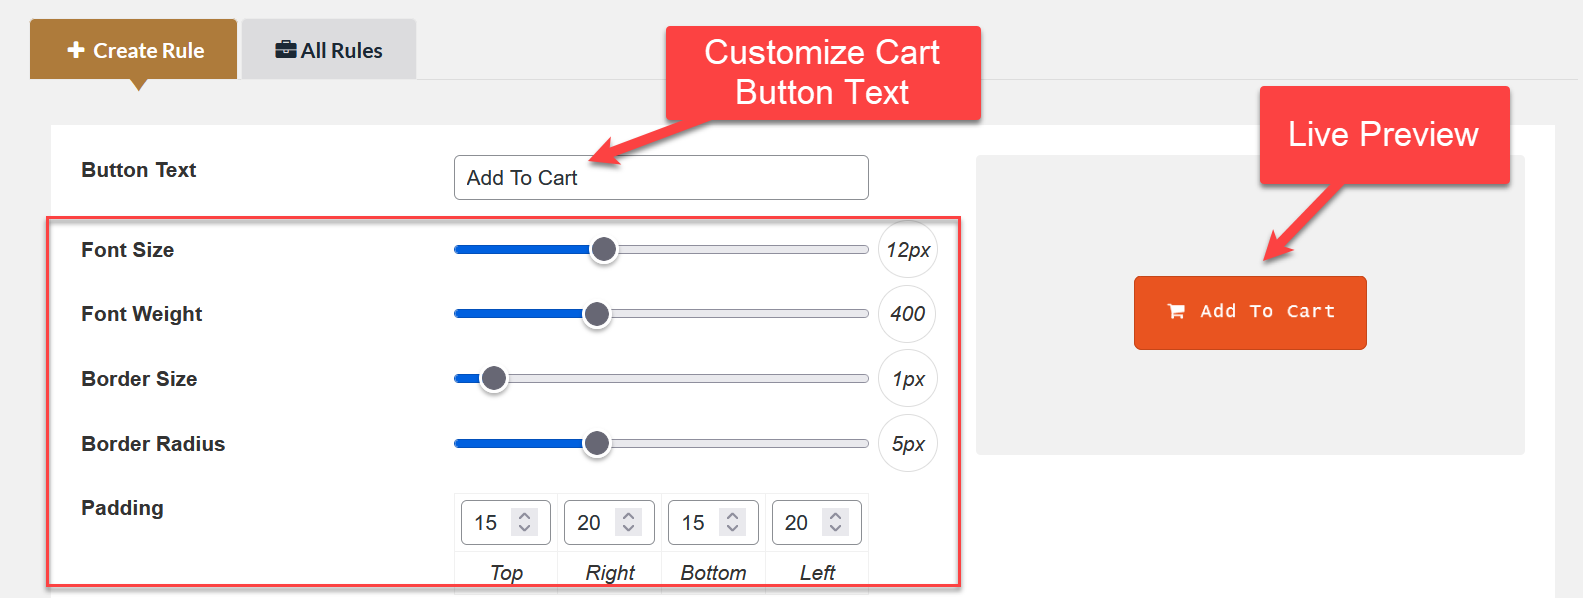 WooCommerce custom add to cart button